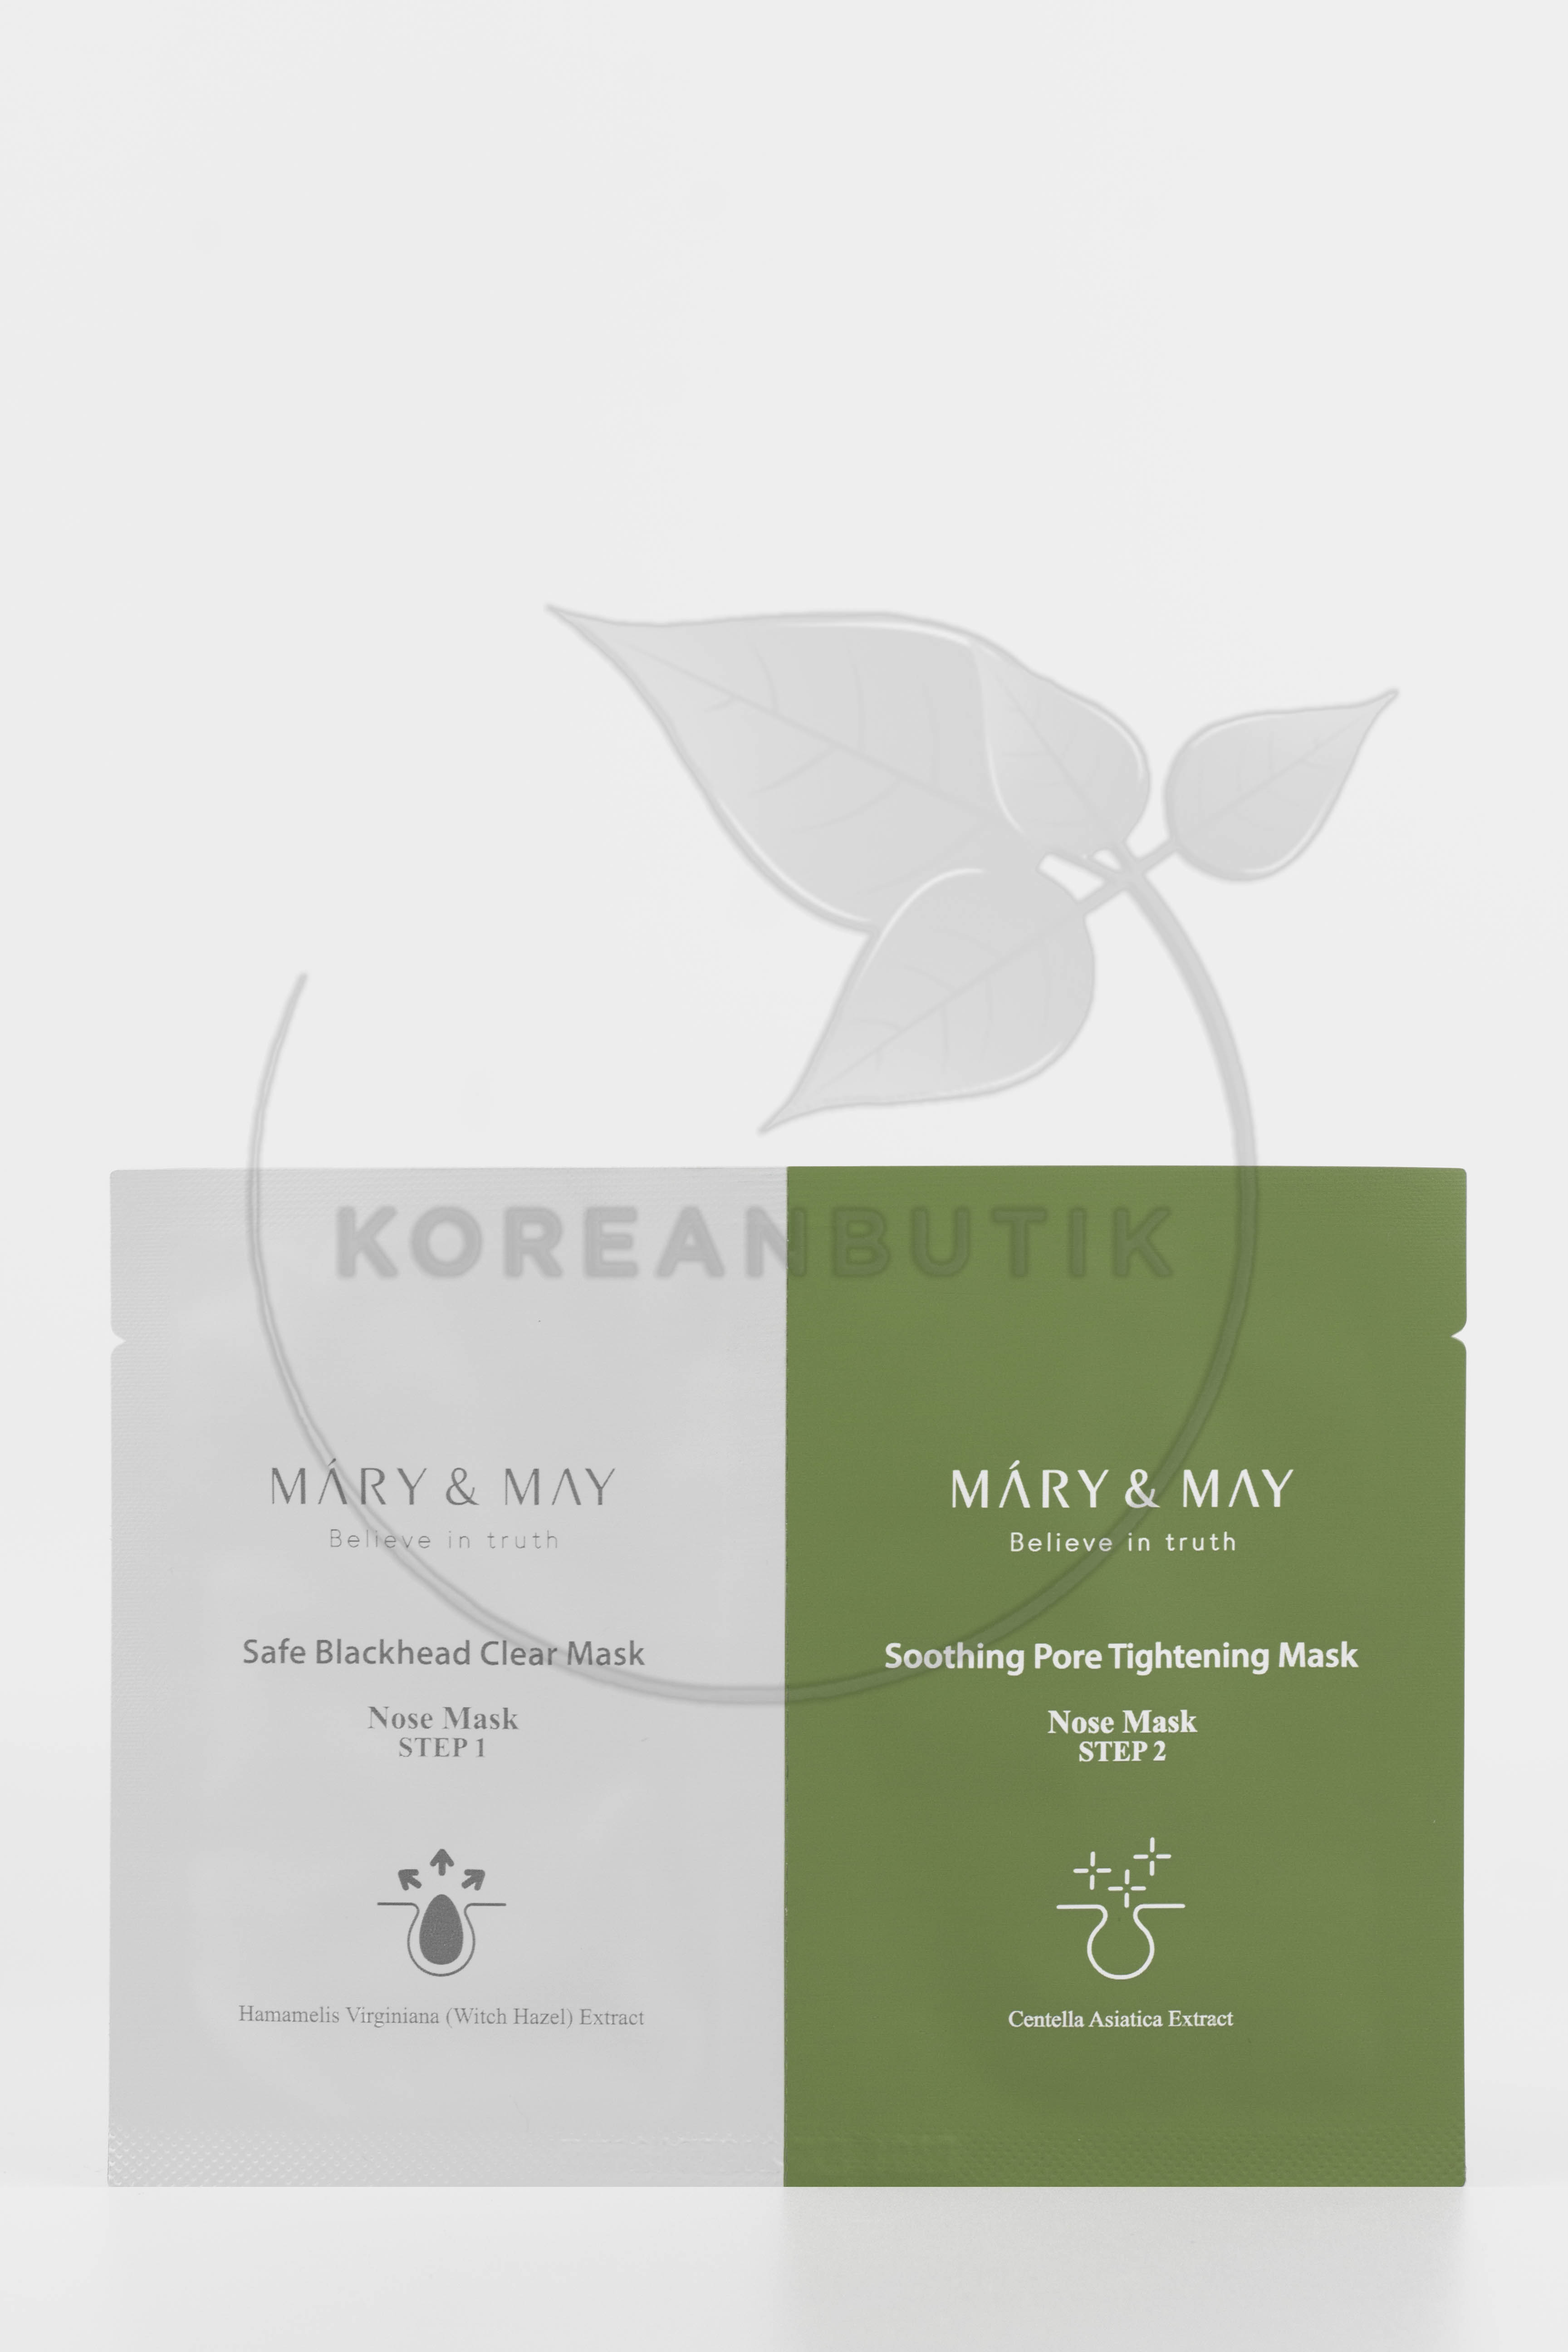  Mary&May Daily Safe Black Head Clear Nose Mask 2*3,5гр 